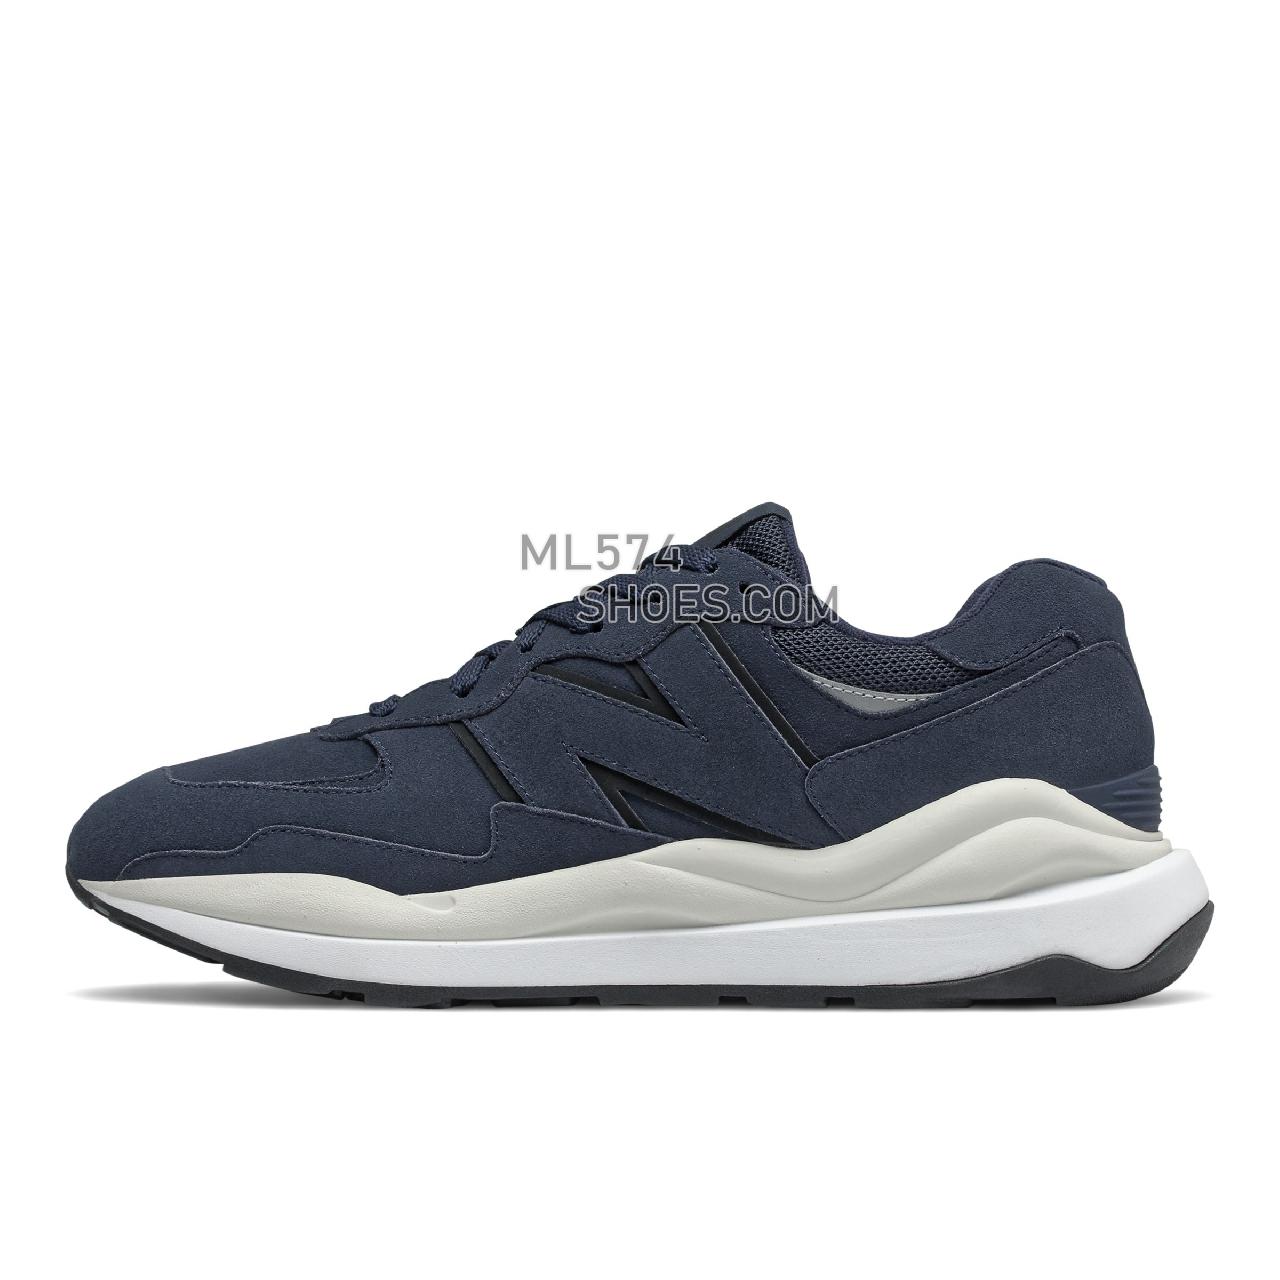 New Balance 57/40 - Men's Sport Style Sneakers - Team Navy with Black - M5740RA1